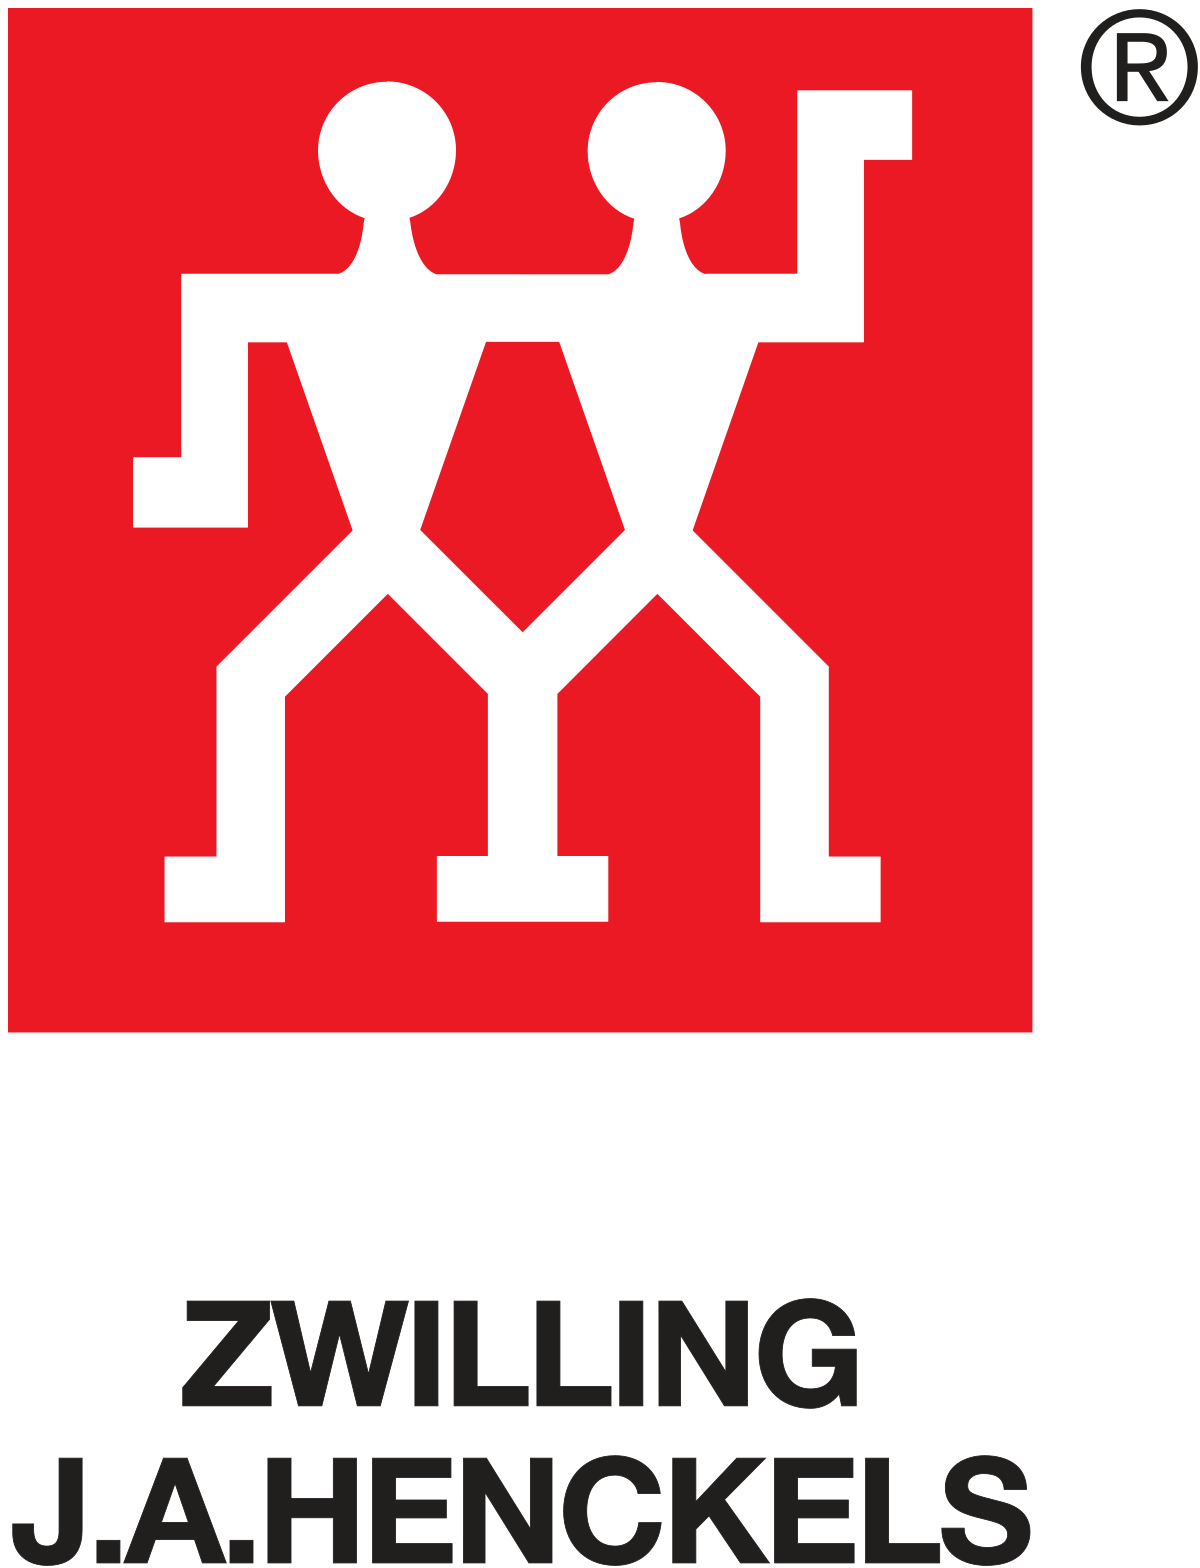 ZWILLING Coupons